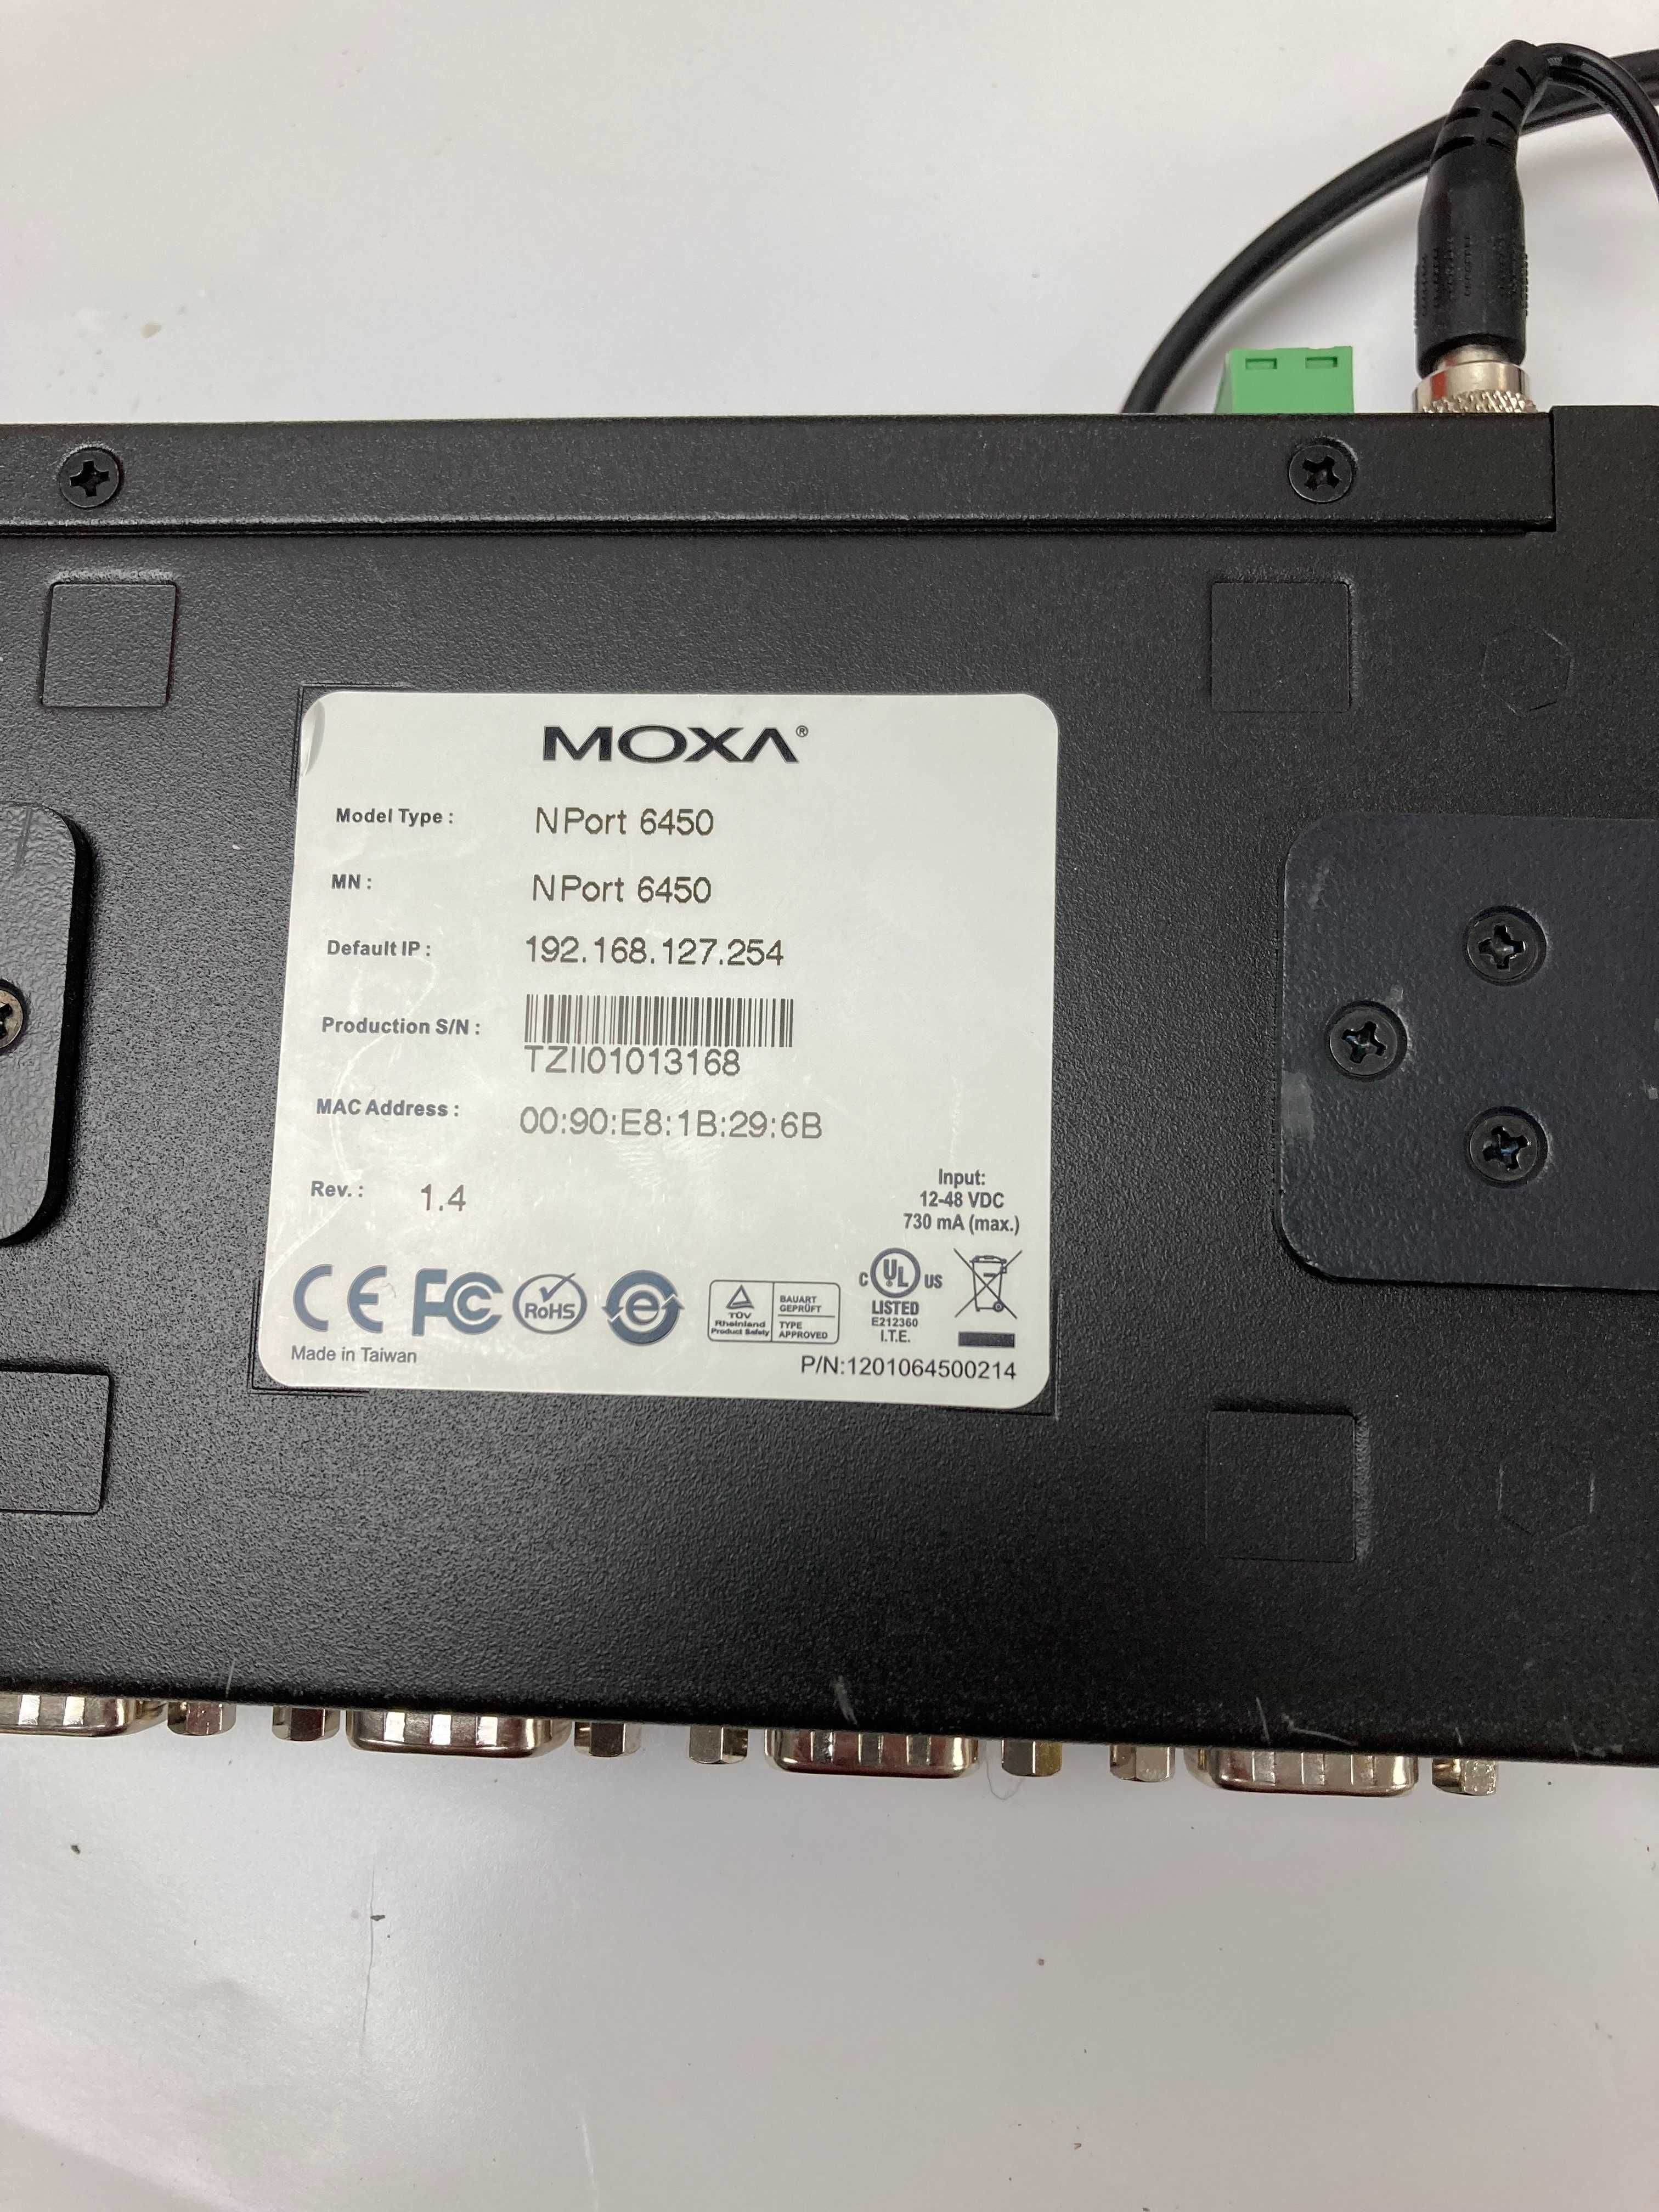 MOXA NPort 6450, 4-port RS-232/422/485 secure terminal servers